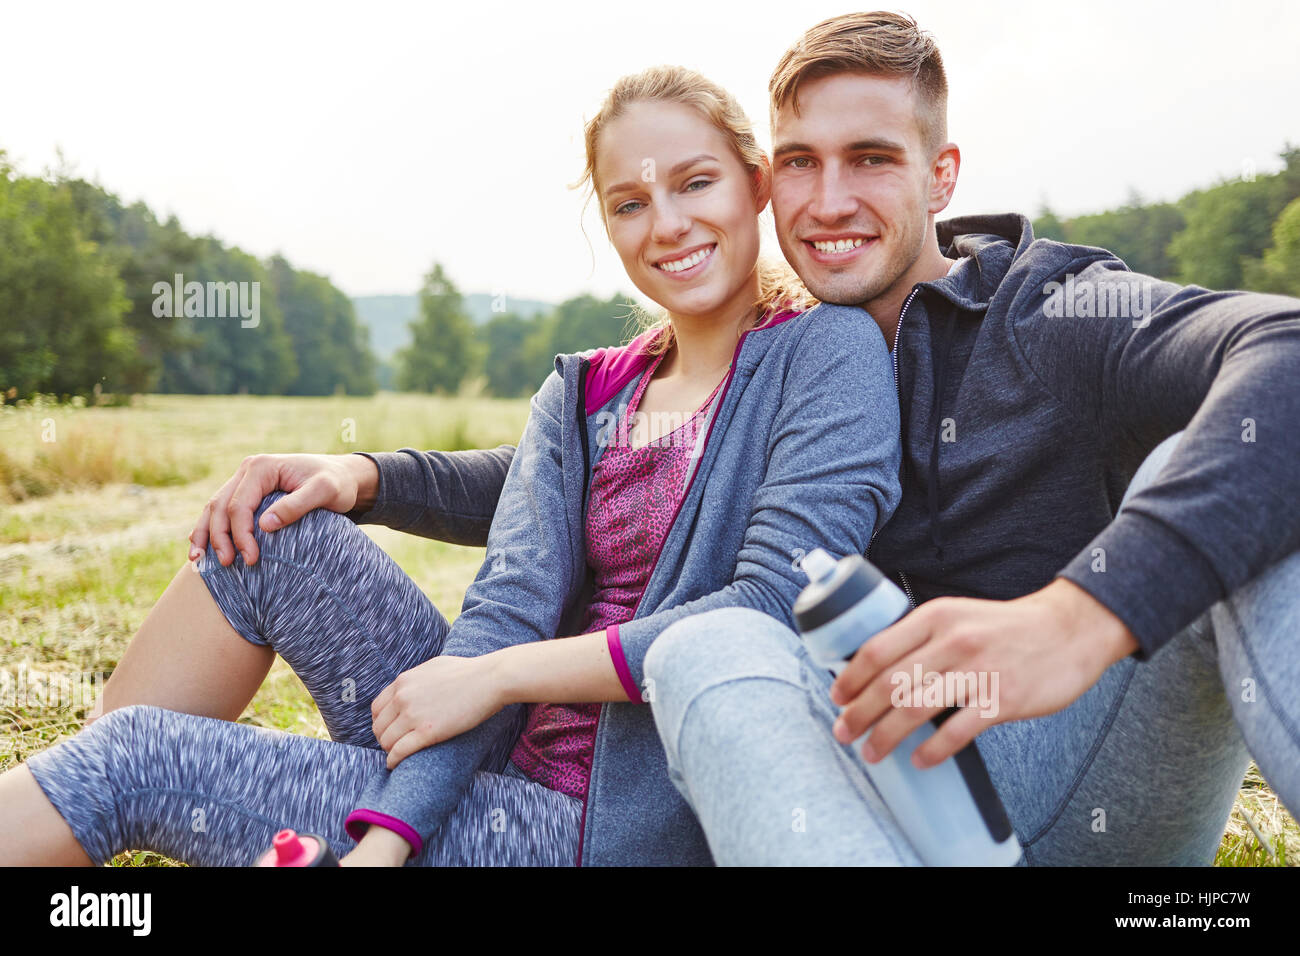 Couple in love sitting happy on the grass during a hiking trip Stock Photo